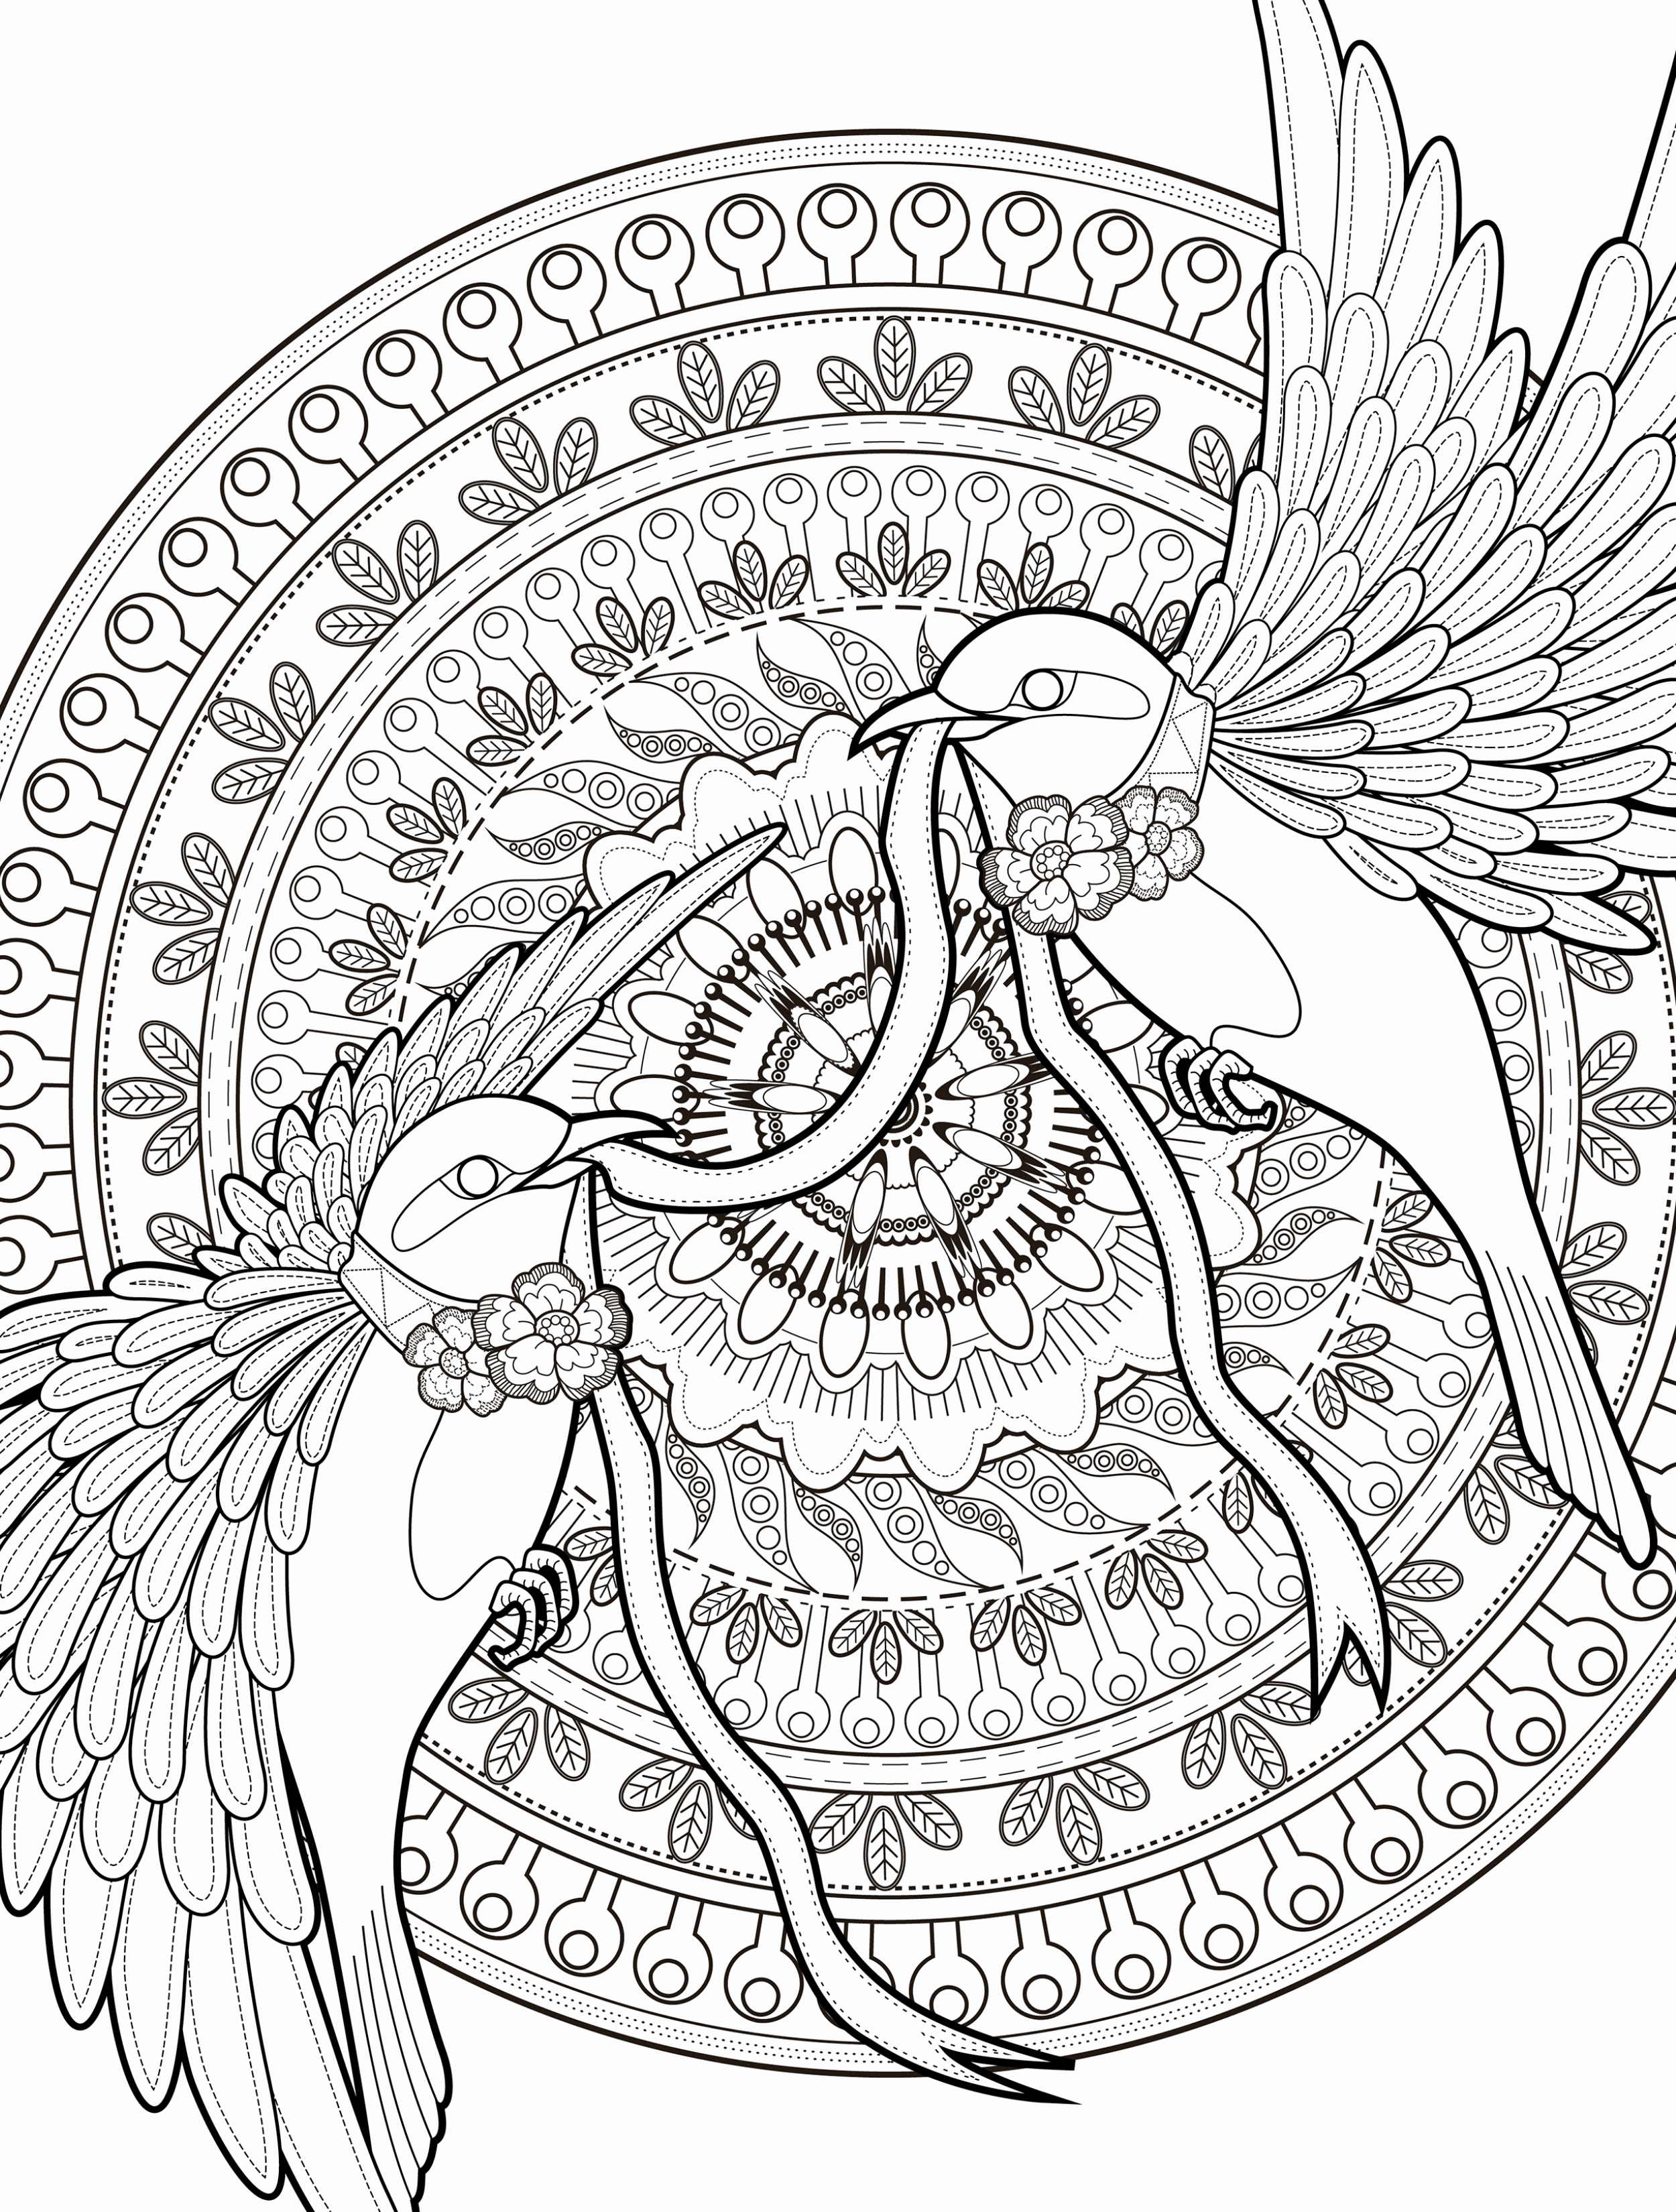 free-adult-coloring-pages-pdf-at-getdrawings-free-download